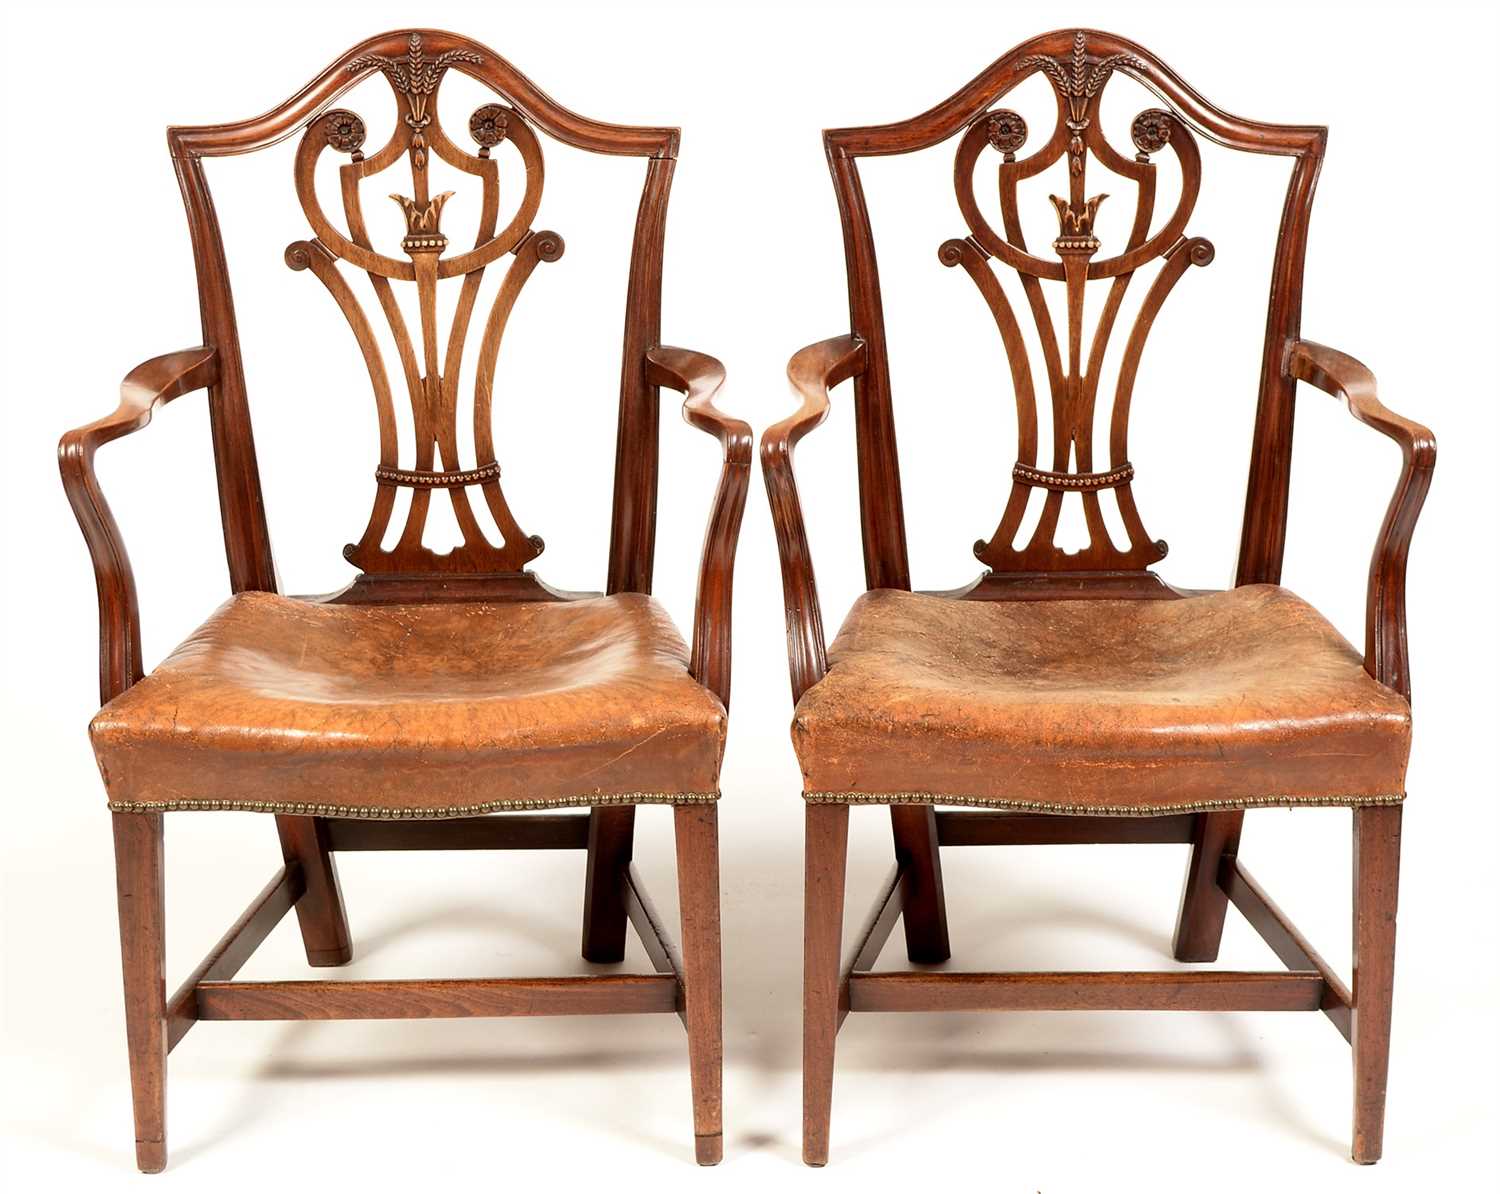 Lot 756 - A near identical pair of George III mahogany armchairs.